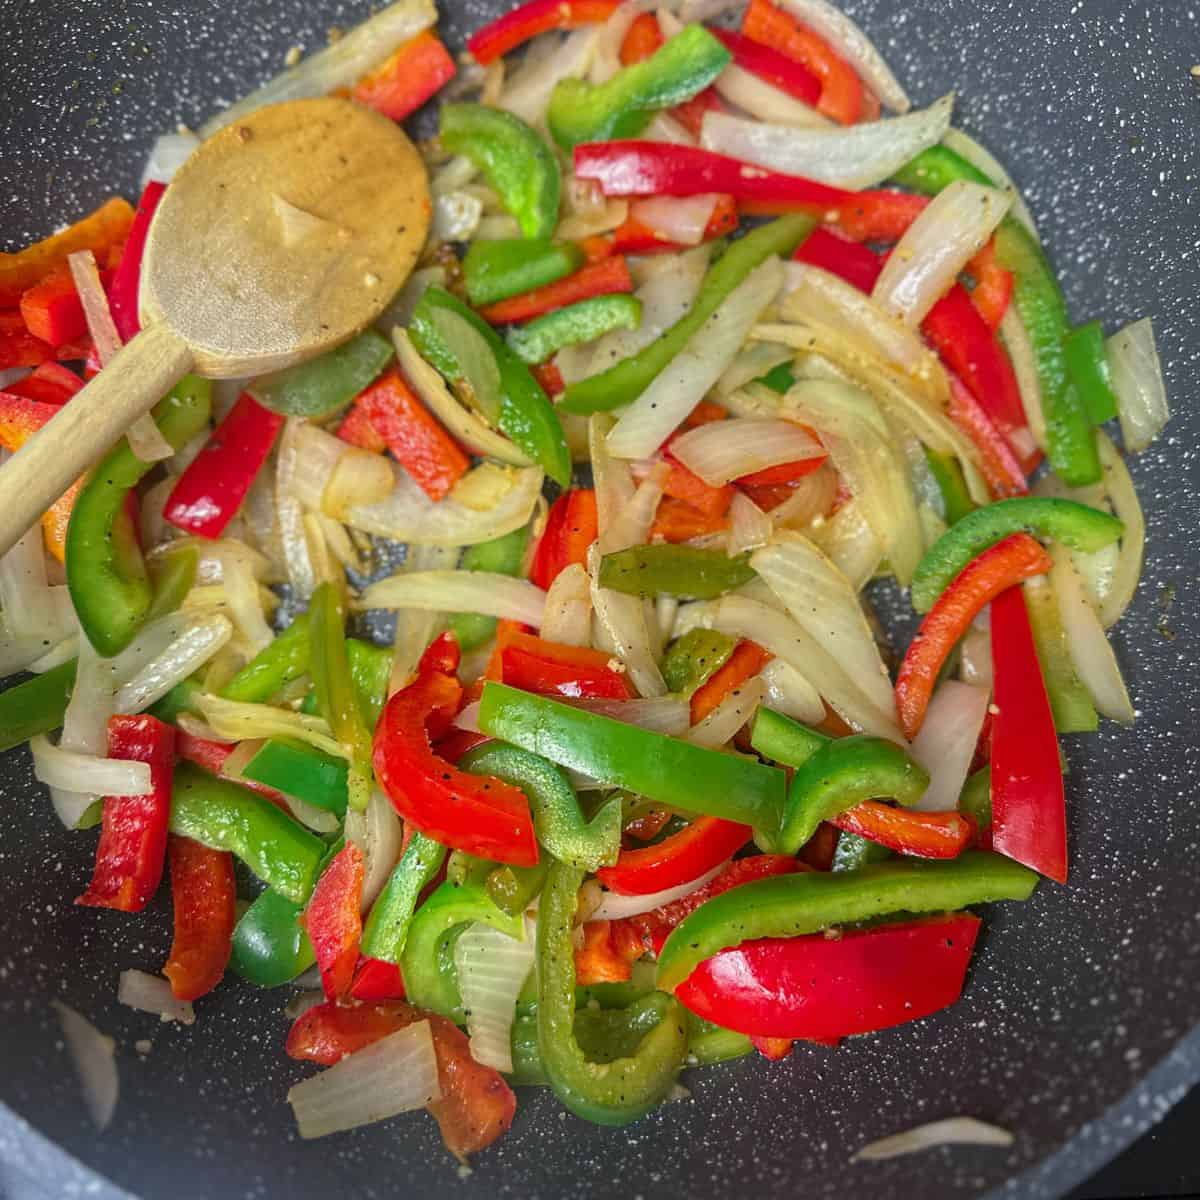 Sautéing sliced green and red bell peppers and onions in a skillet, getting tender and ready for adding to the steak fajitas.